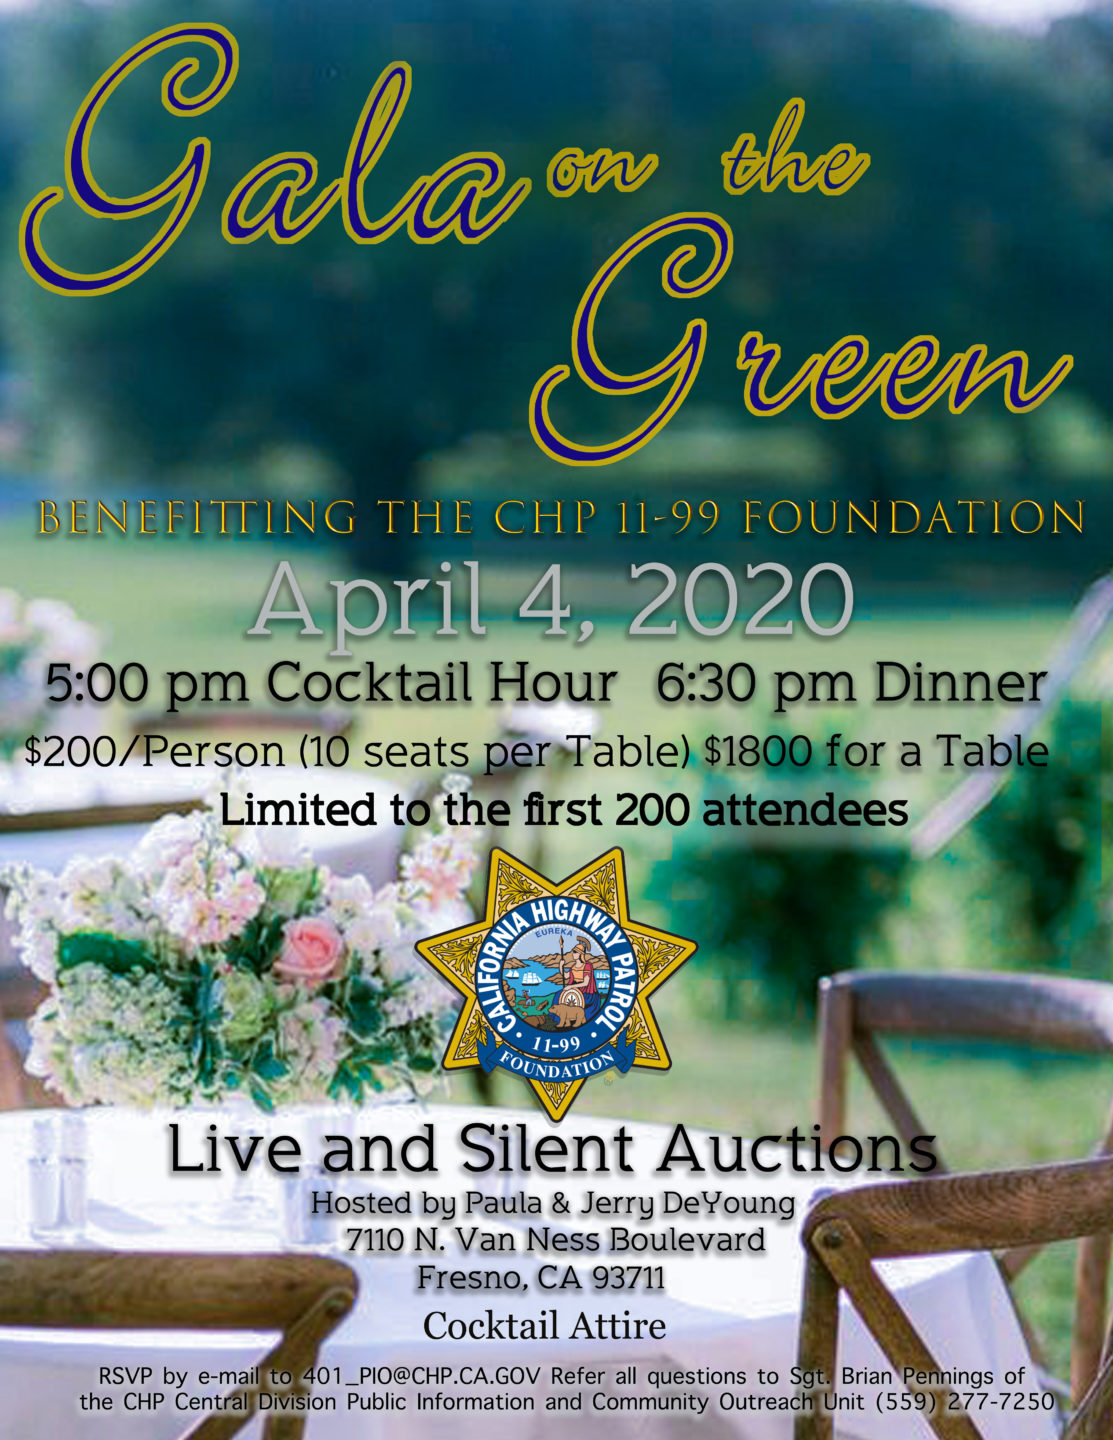 CHP Central Division's Gala on the Green_April 4, 2020 in Fresno, CA